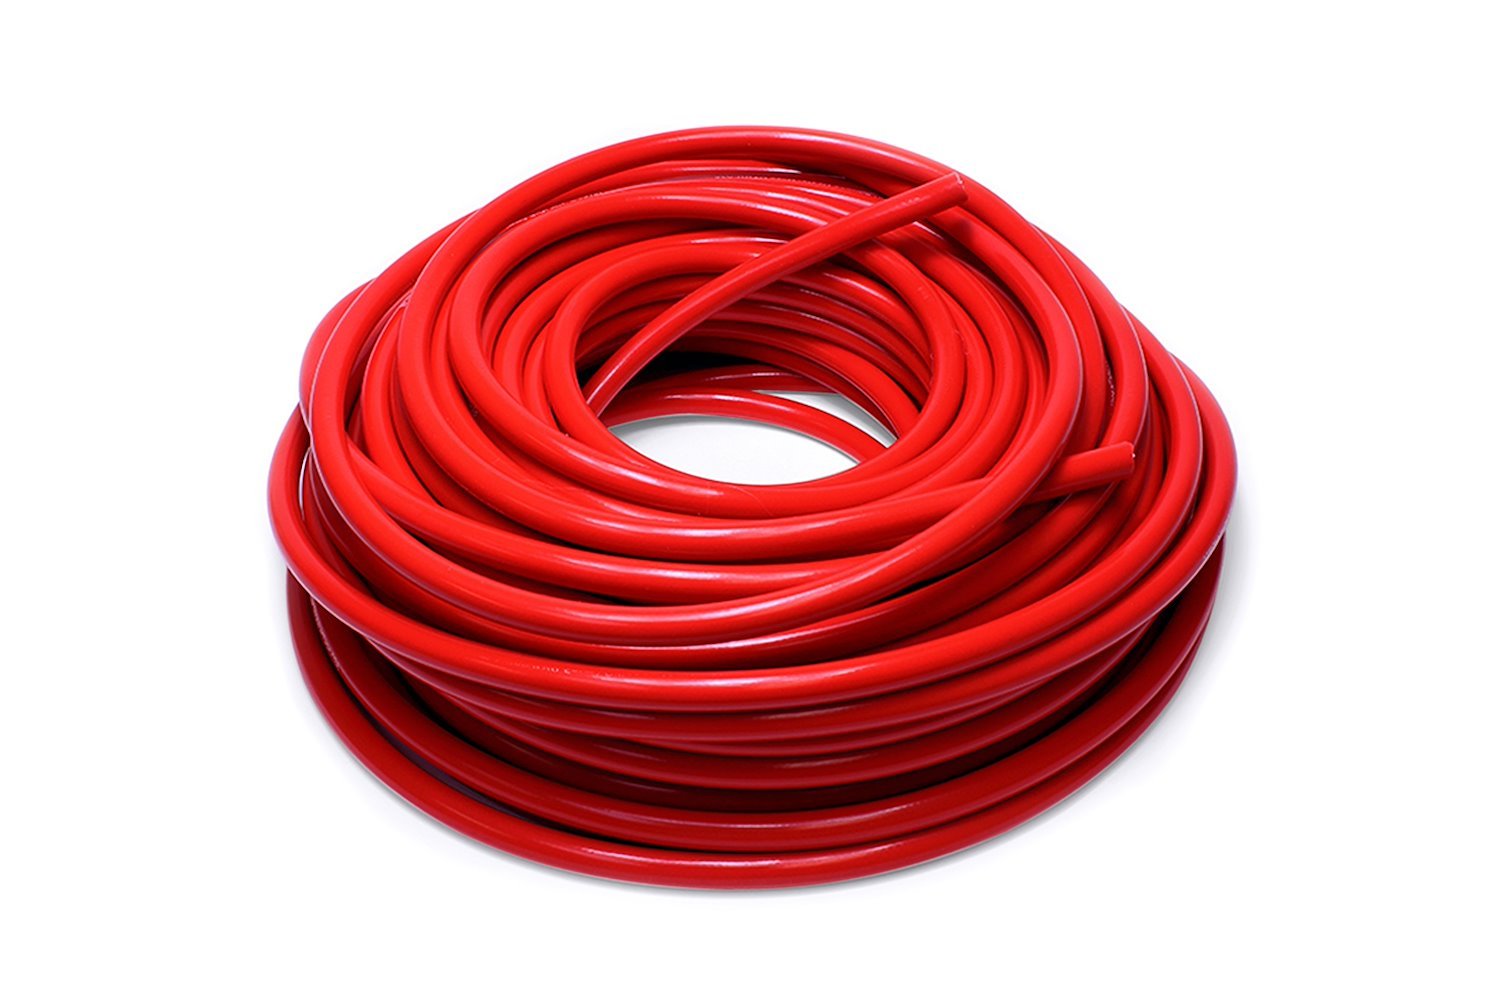 HTHH-032-REDx100 Silicone Heater Hose Tubing, High-Temp Reinforced, 5/16 in. ID, 100 ft. Roll, Red